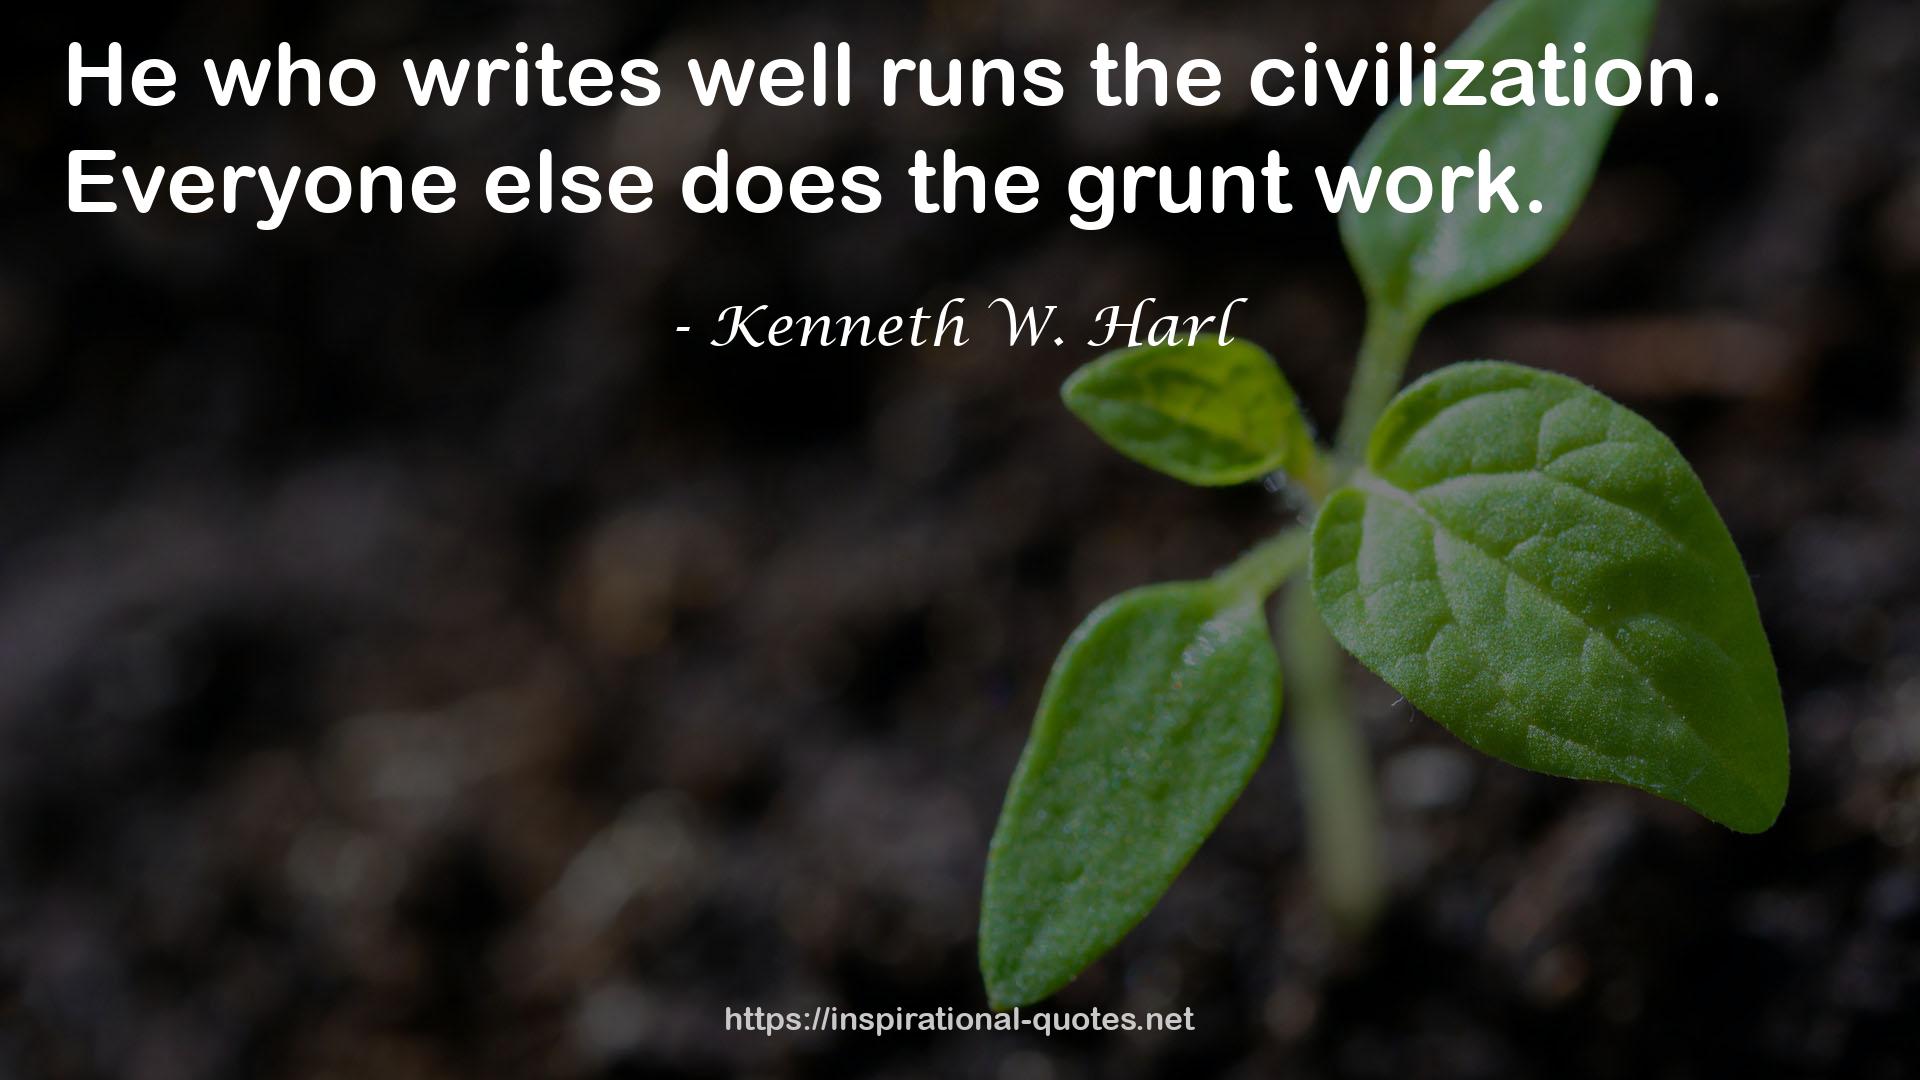 Kenneth W. Harl QUOTES